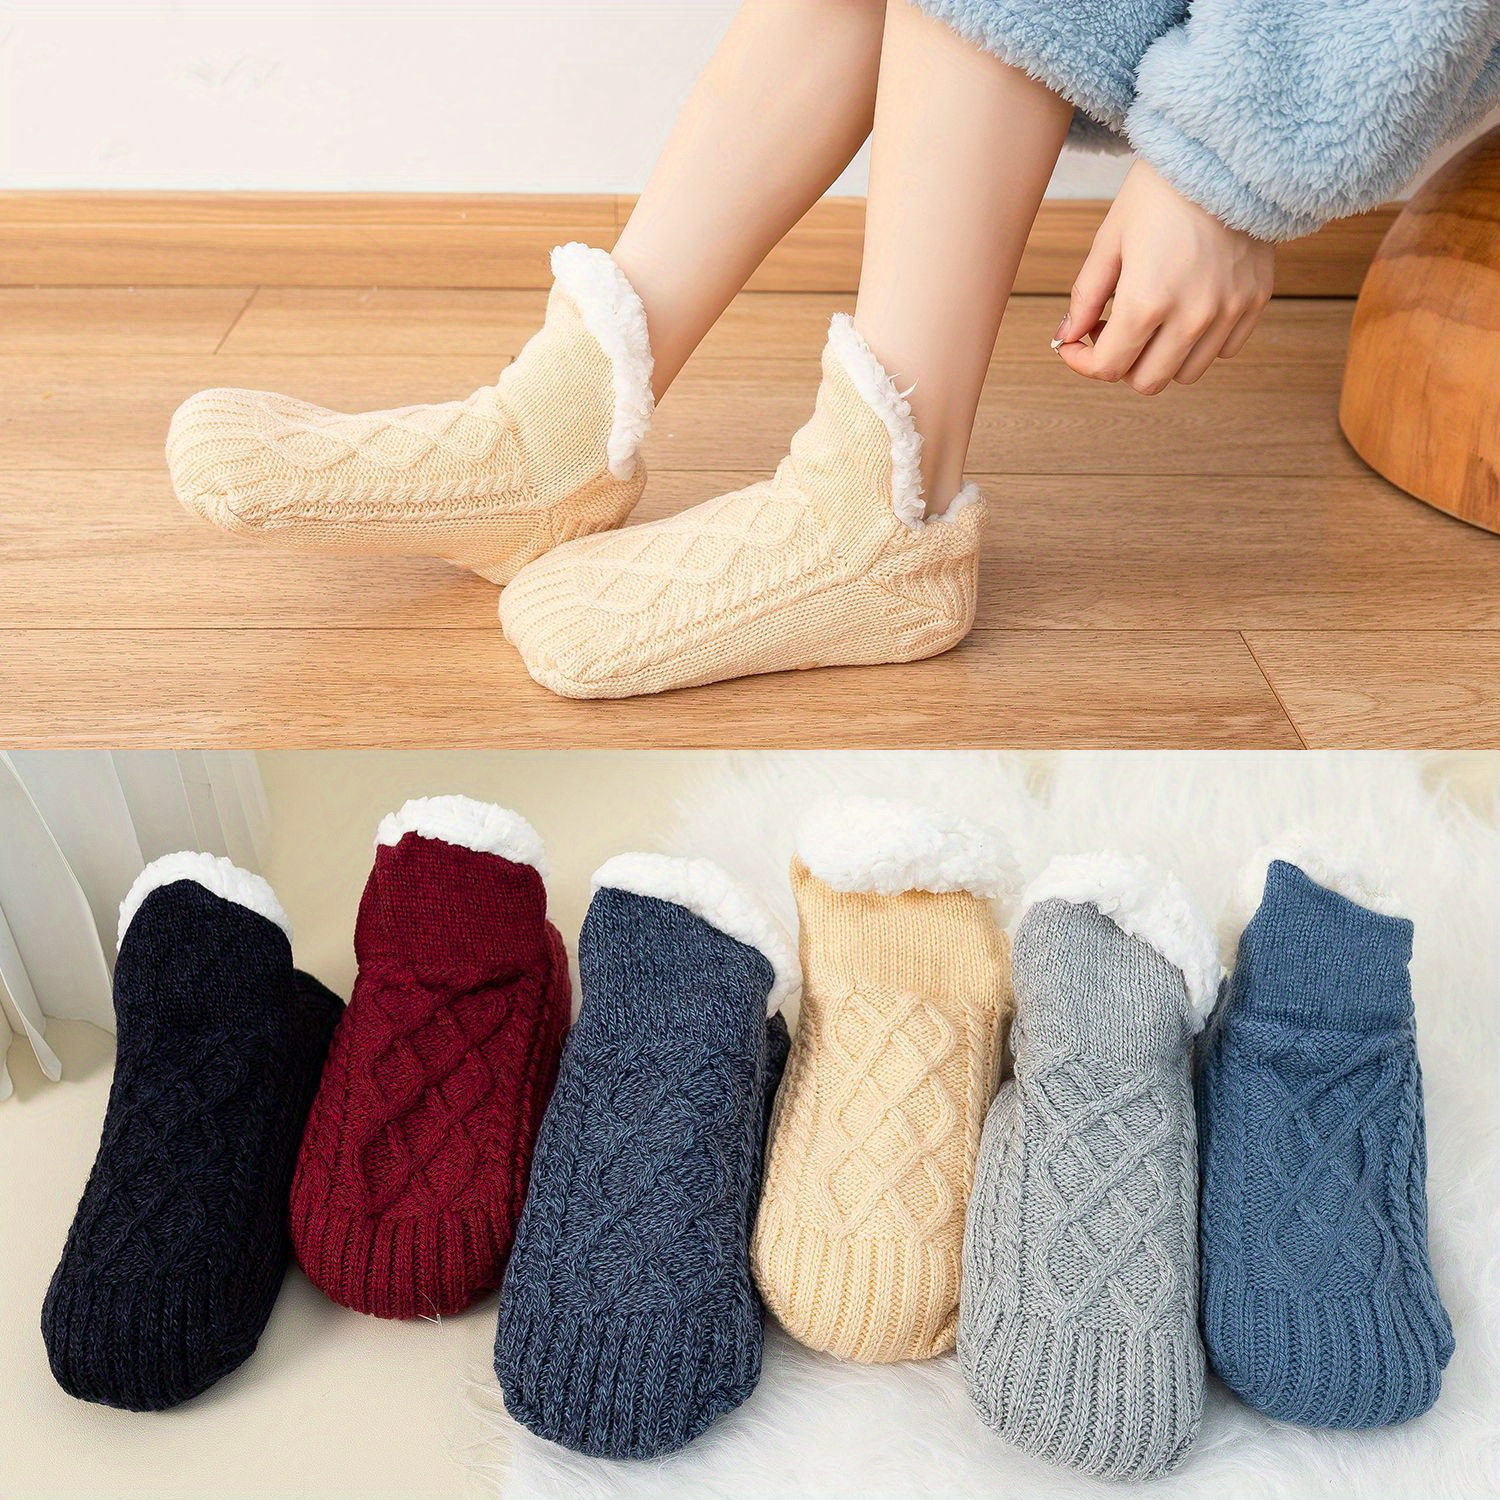 1 pair mens fleece warm thermal socks non slip comfy casual unisex knitted socks for mens winter indoor home wearing 2